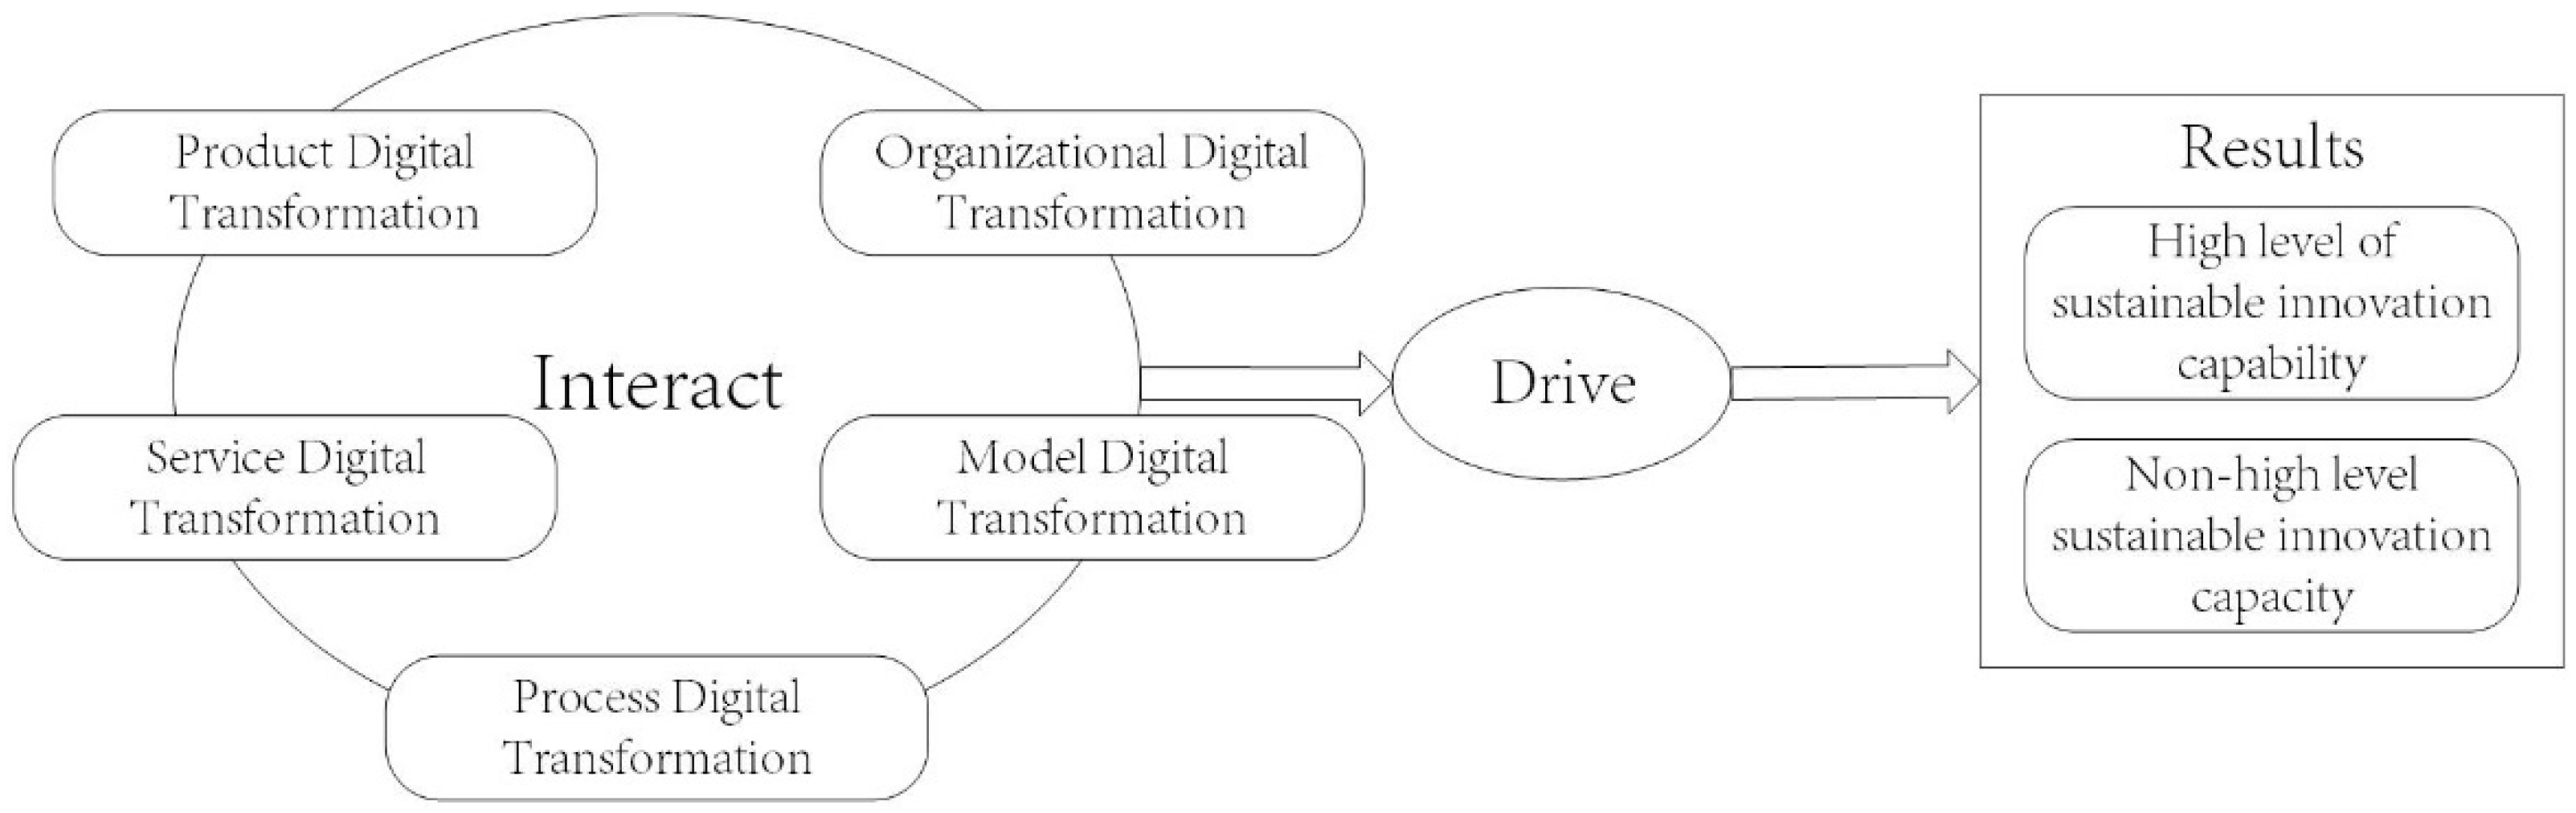 Sustainability | Free Full-Text | Digital Transformation Drives Sustainable  Innovation Capability Improvement in Manufacturing Enterprises: Based on  FsQCA and NCA Approaches